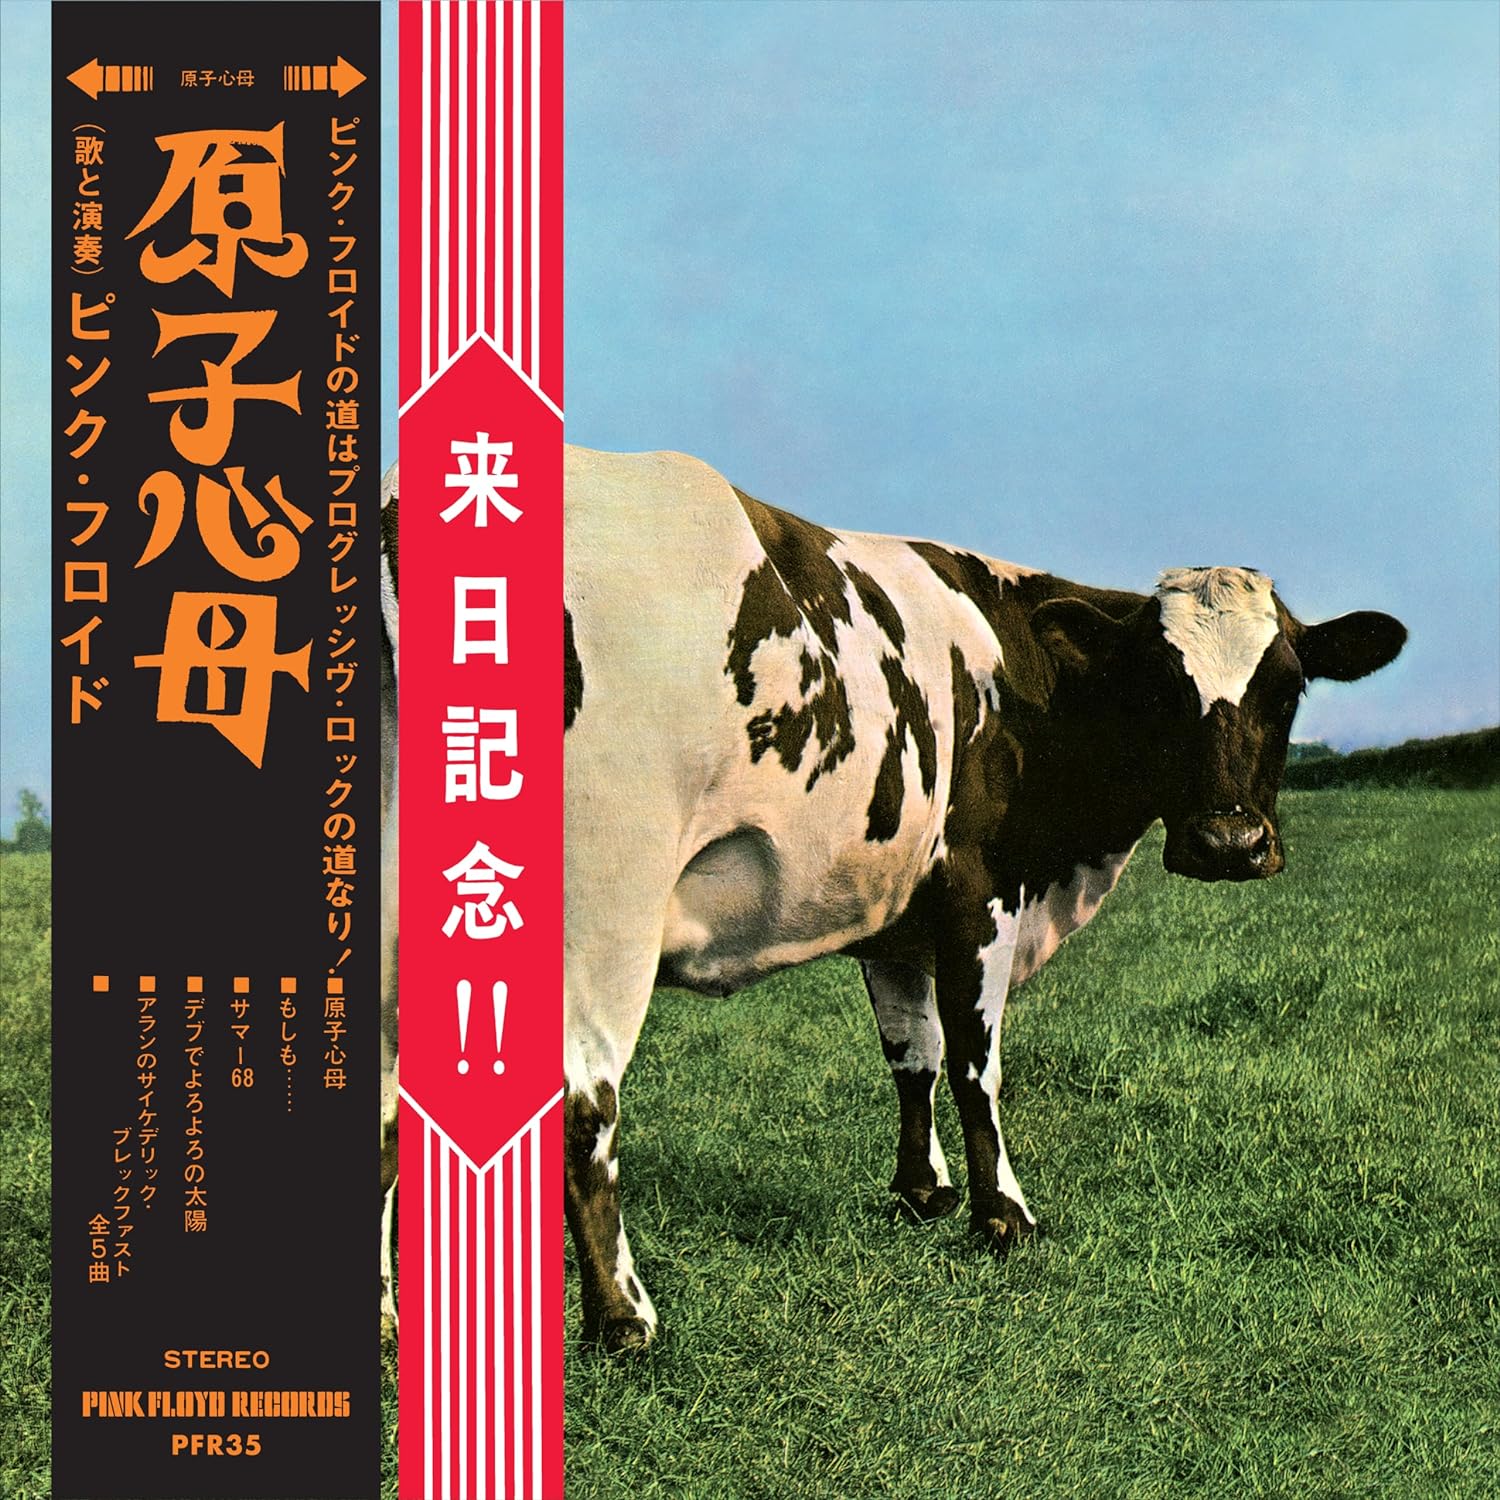 Atom Heart Mother “Hakone Aphrodite” Japan 1971 – Special Limited Edition (CD + Blu-Ray Video)